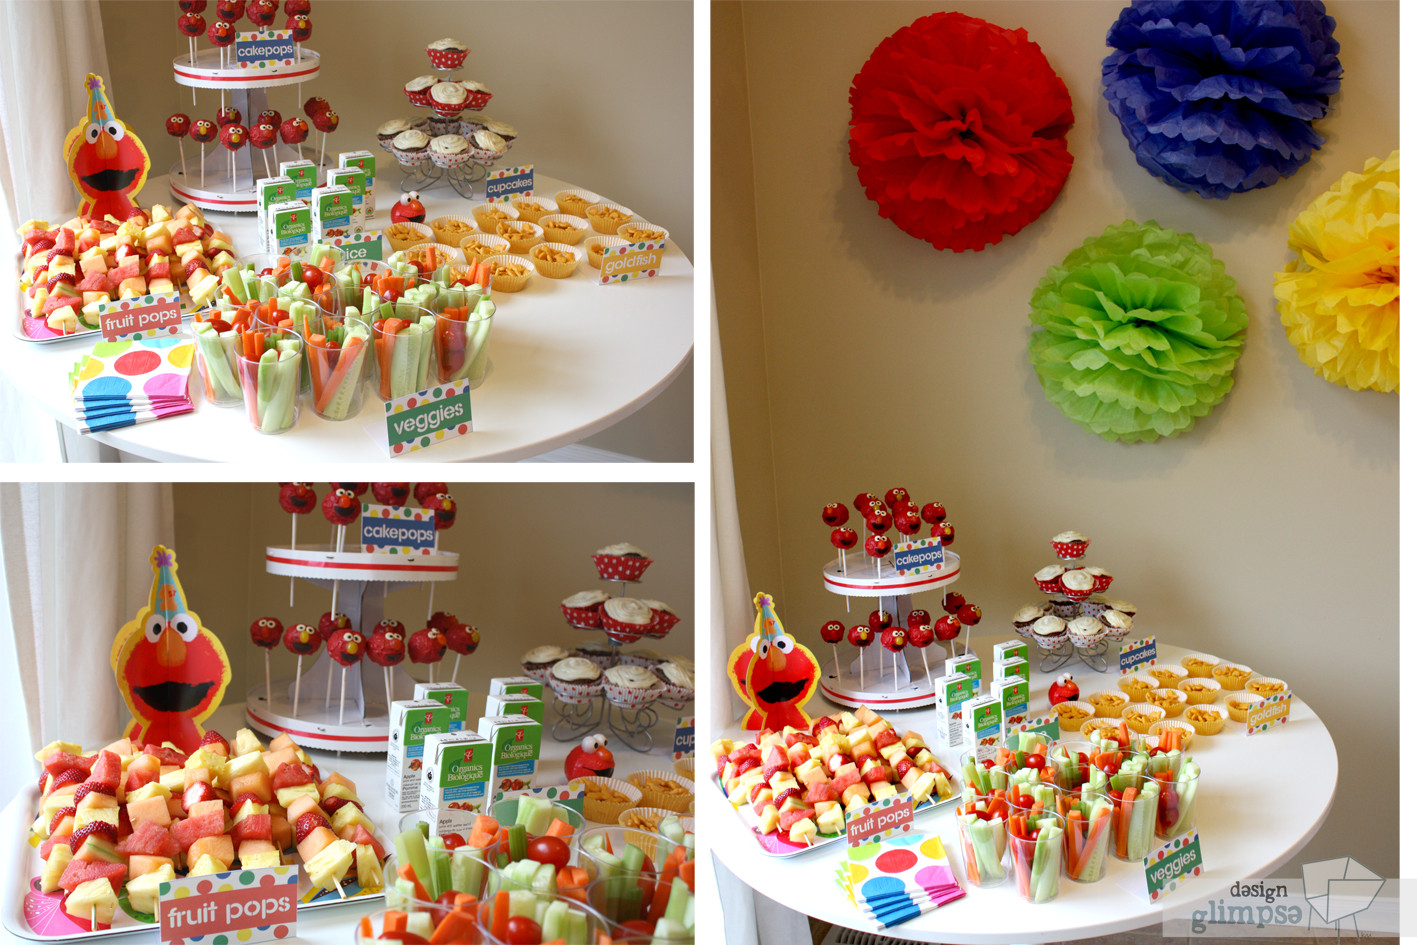 Food Ideas For 1st Birthday Party
 design glimpse Little S s Elmo s first birthday party